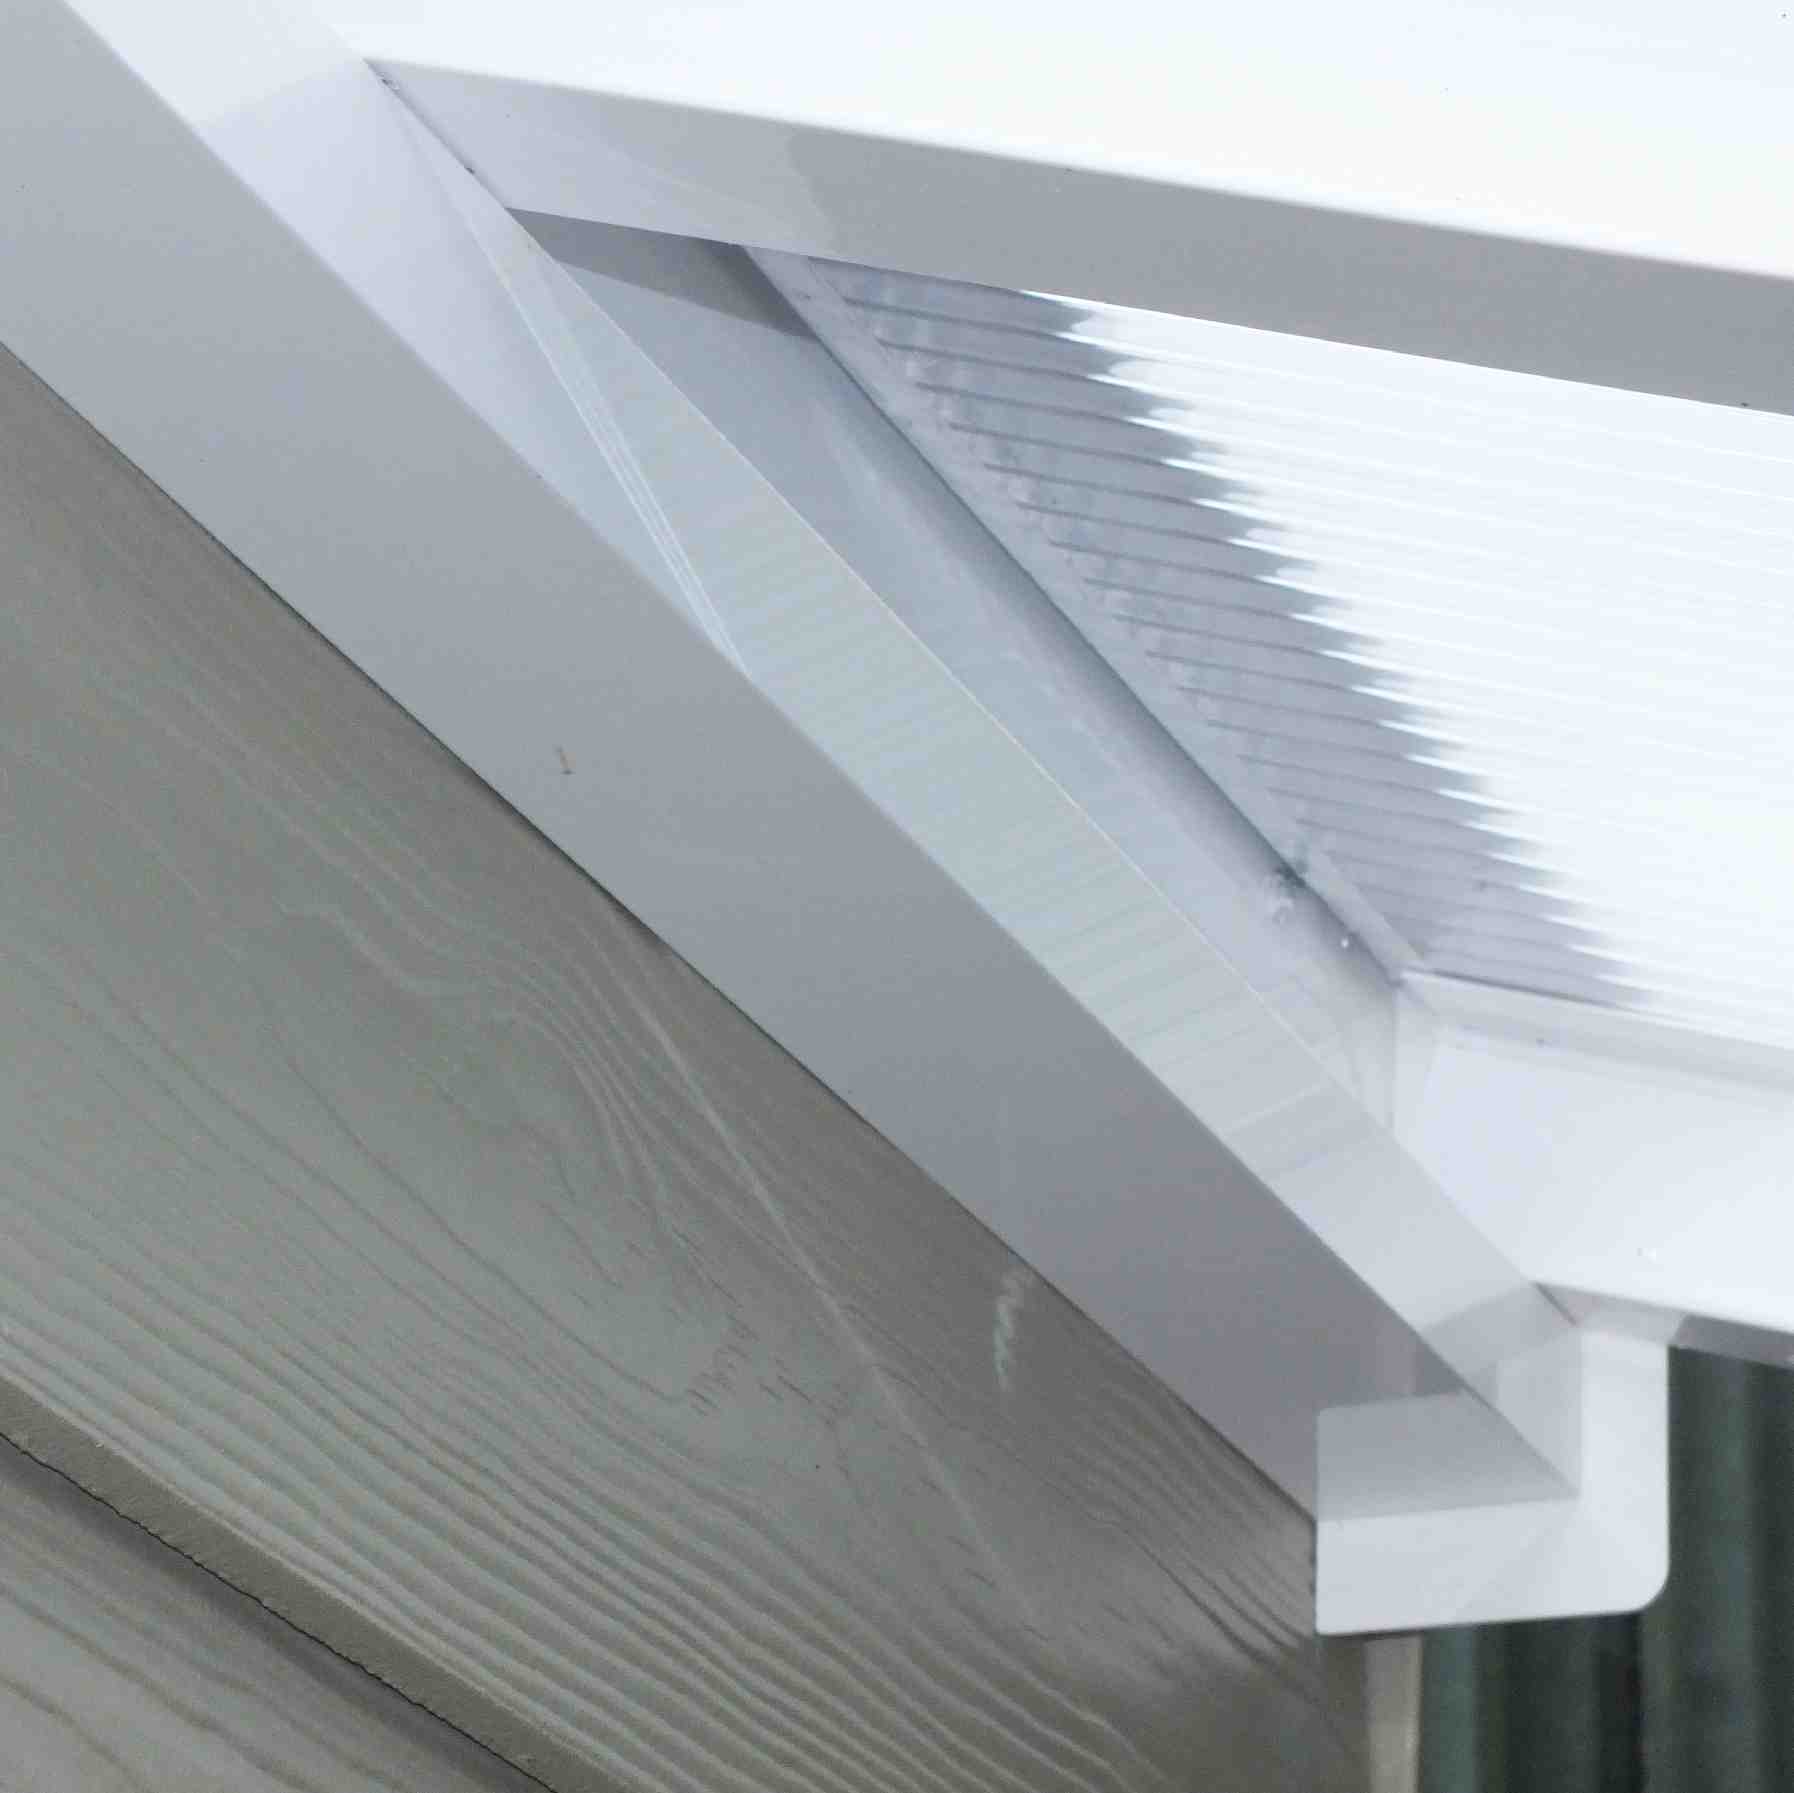 Great deals on Omega Verandah White with 16mm Polycarbonate Glazing - 12.0m (W) x 2.0m (P), (5) Supporting Posts